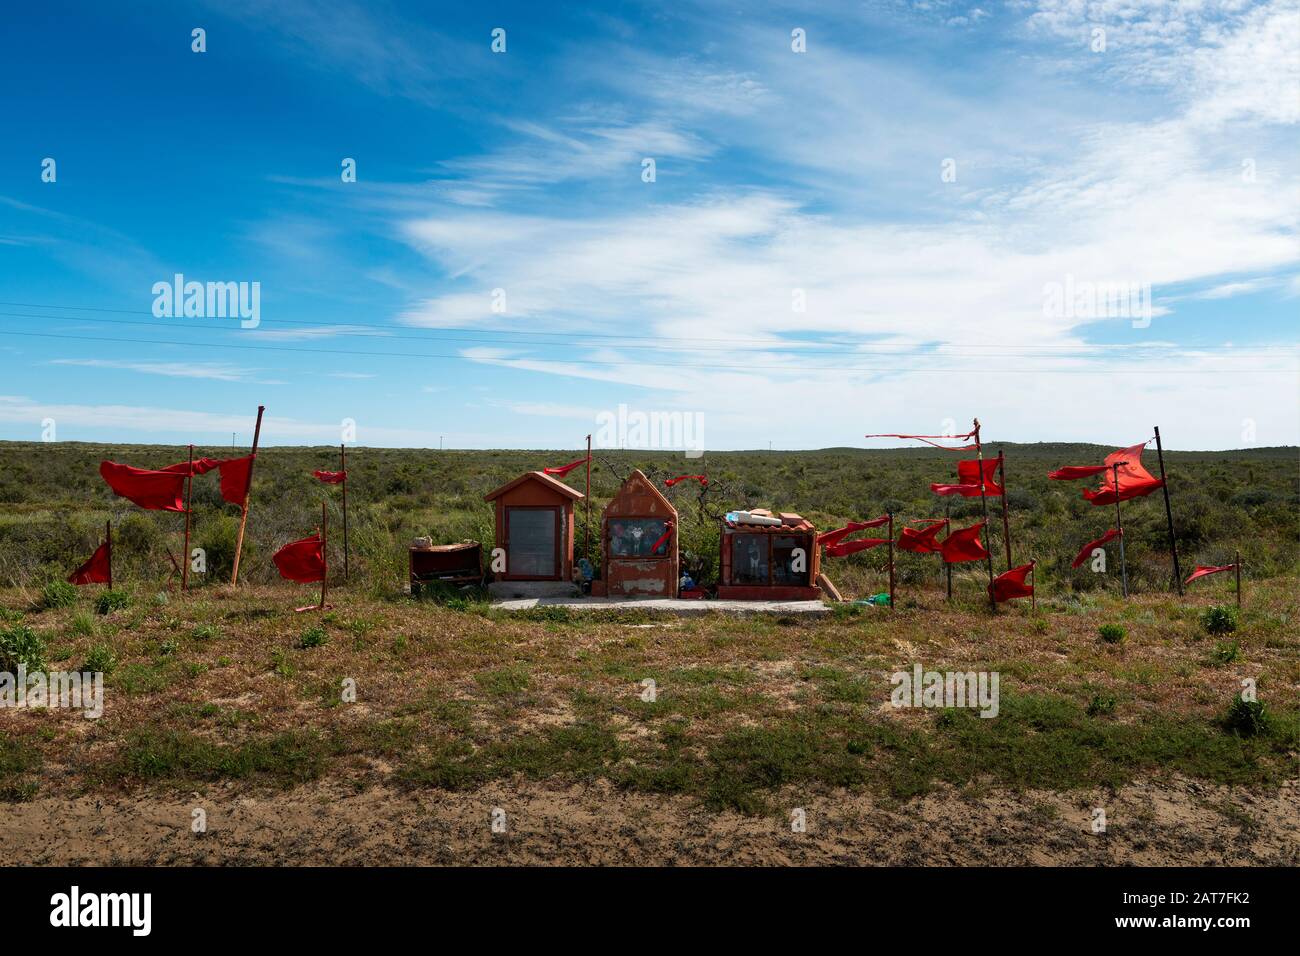 A Guachito Gil shrine with red flags along a road at the Valdes Peninsula in Argentina, South America. Stock Photo